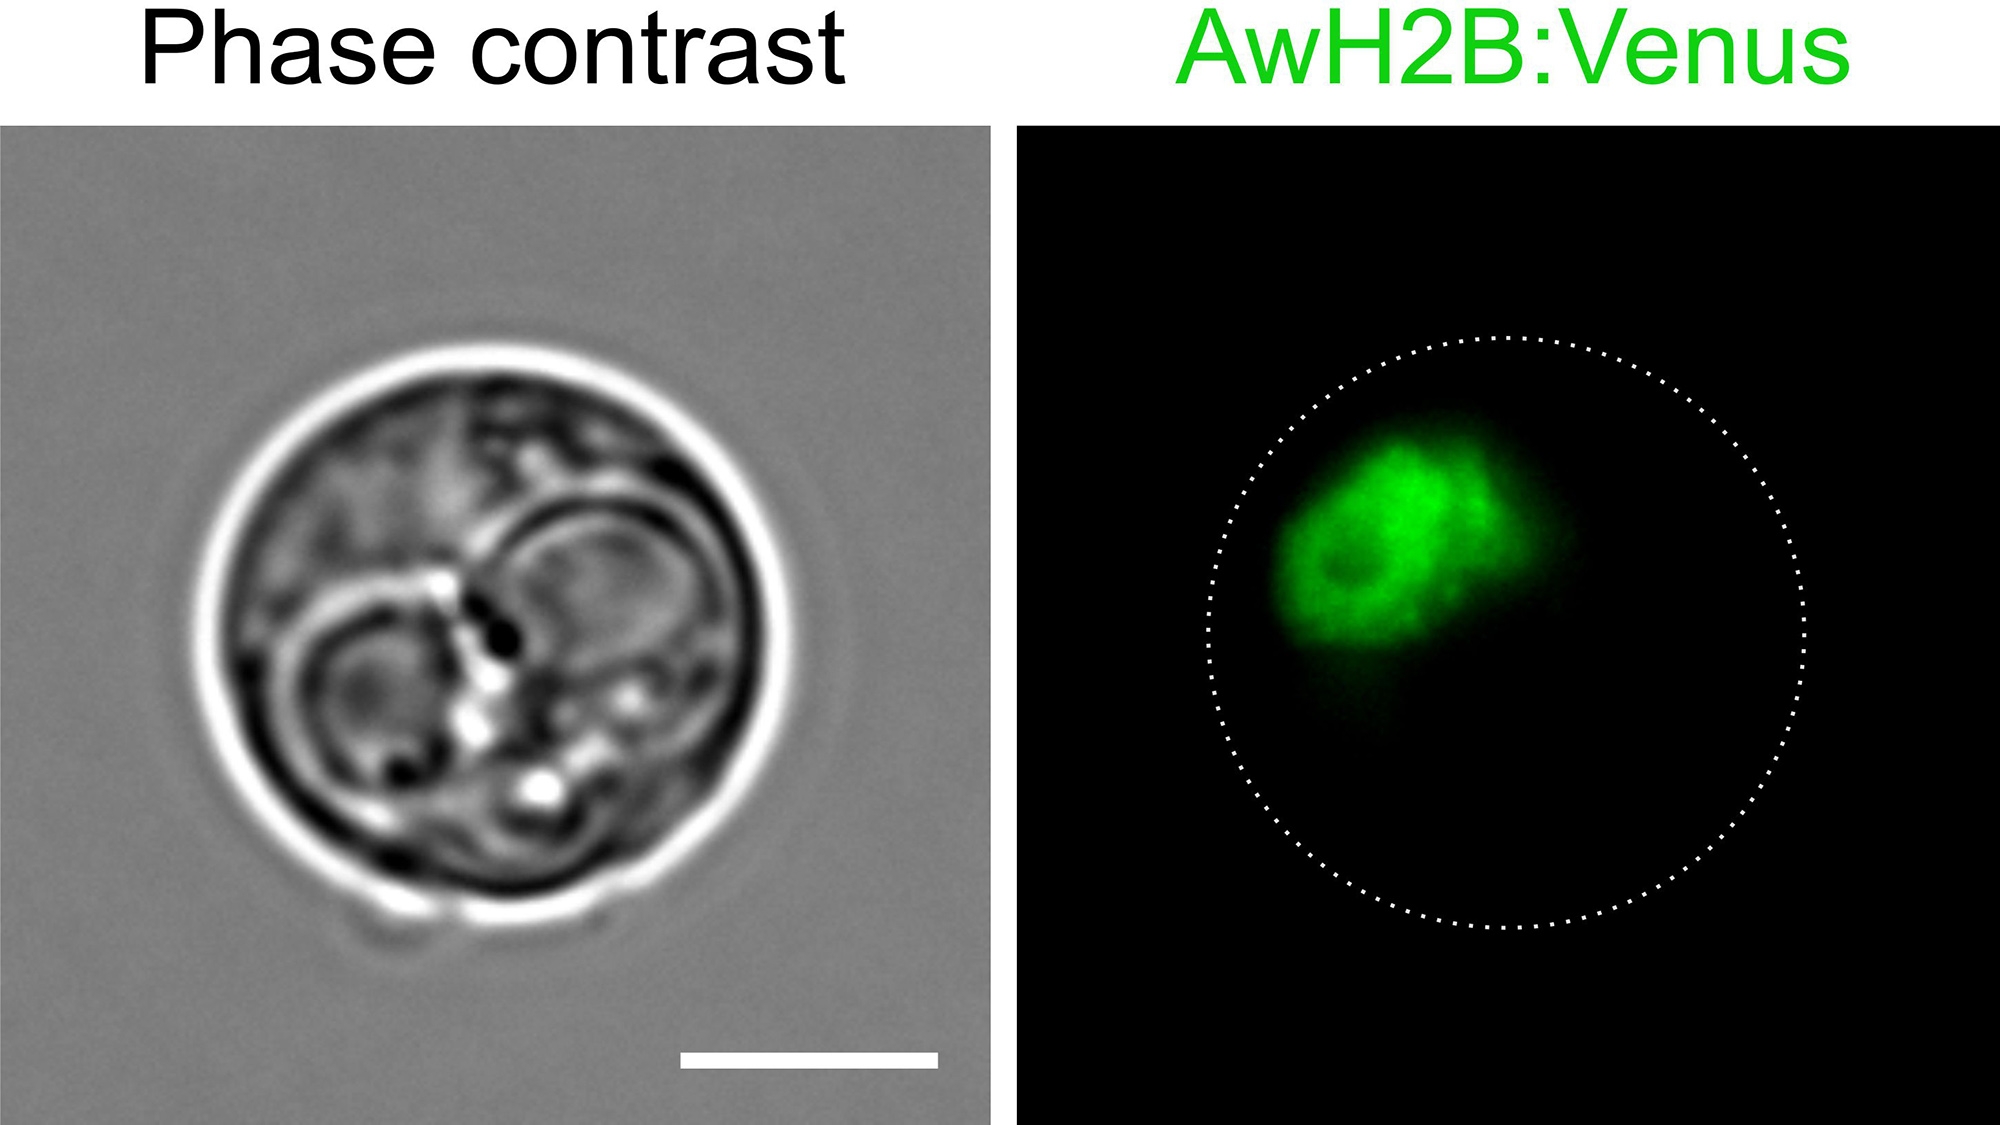 Abeoforma whisleri is a single-celled marine protist important in scientific research to understand the origins of animals. A. whisleri cells were transformed with plasmid DNA encoding a fluorescence protein to label the A. whisleri nuclei in green, enabling an experimental model systems team to better study the life cycle of this organism. | Picture by Sebastian. R Najle and Elena Casacuberta.